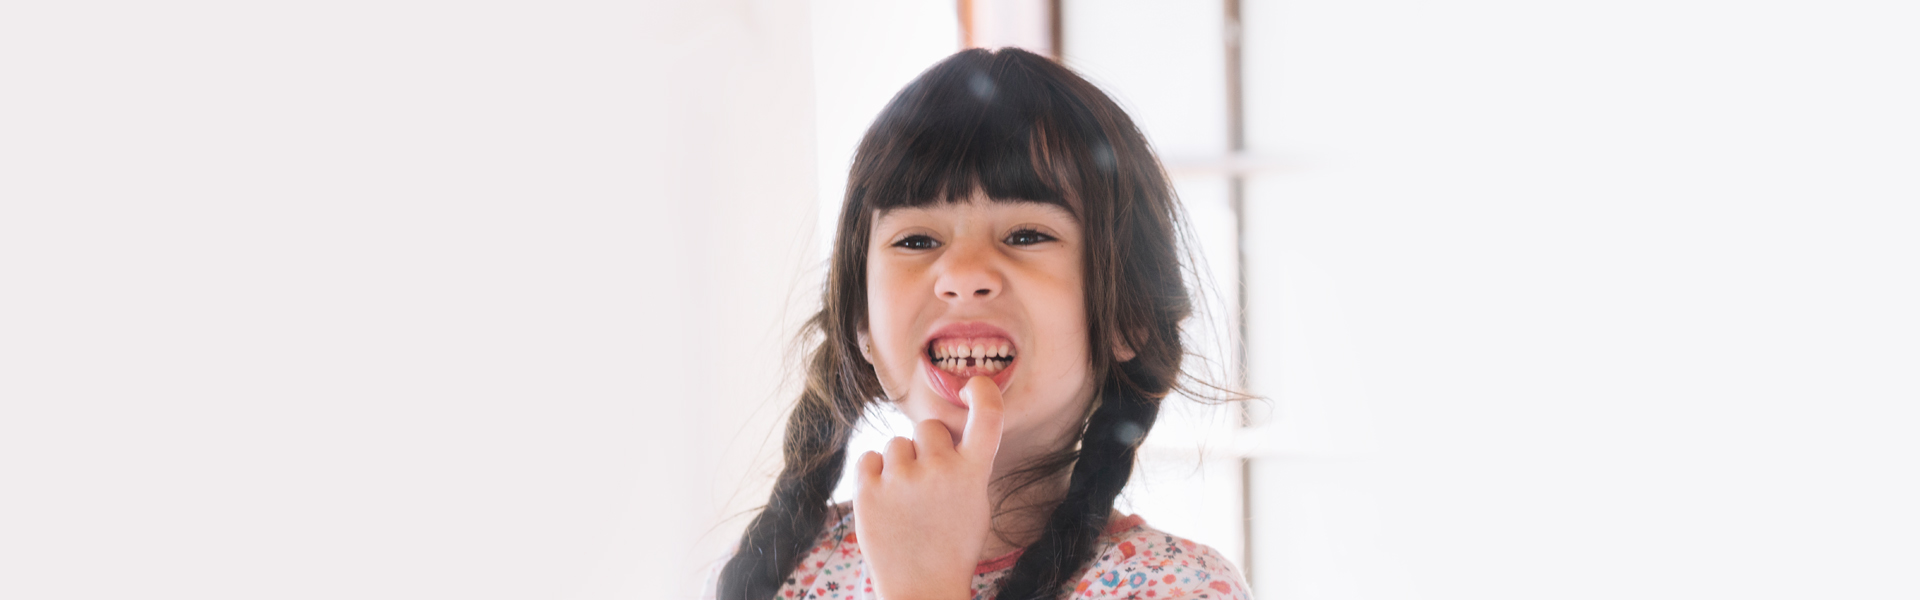 What Dental Problems Can a Missing Tooth Cause?